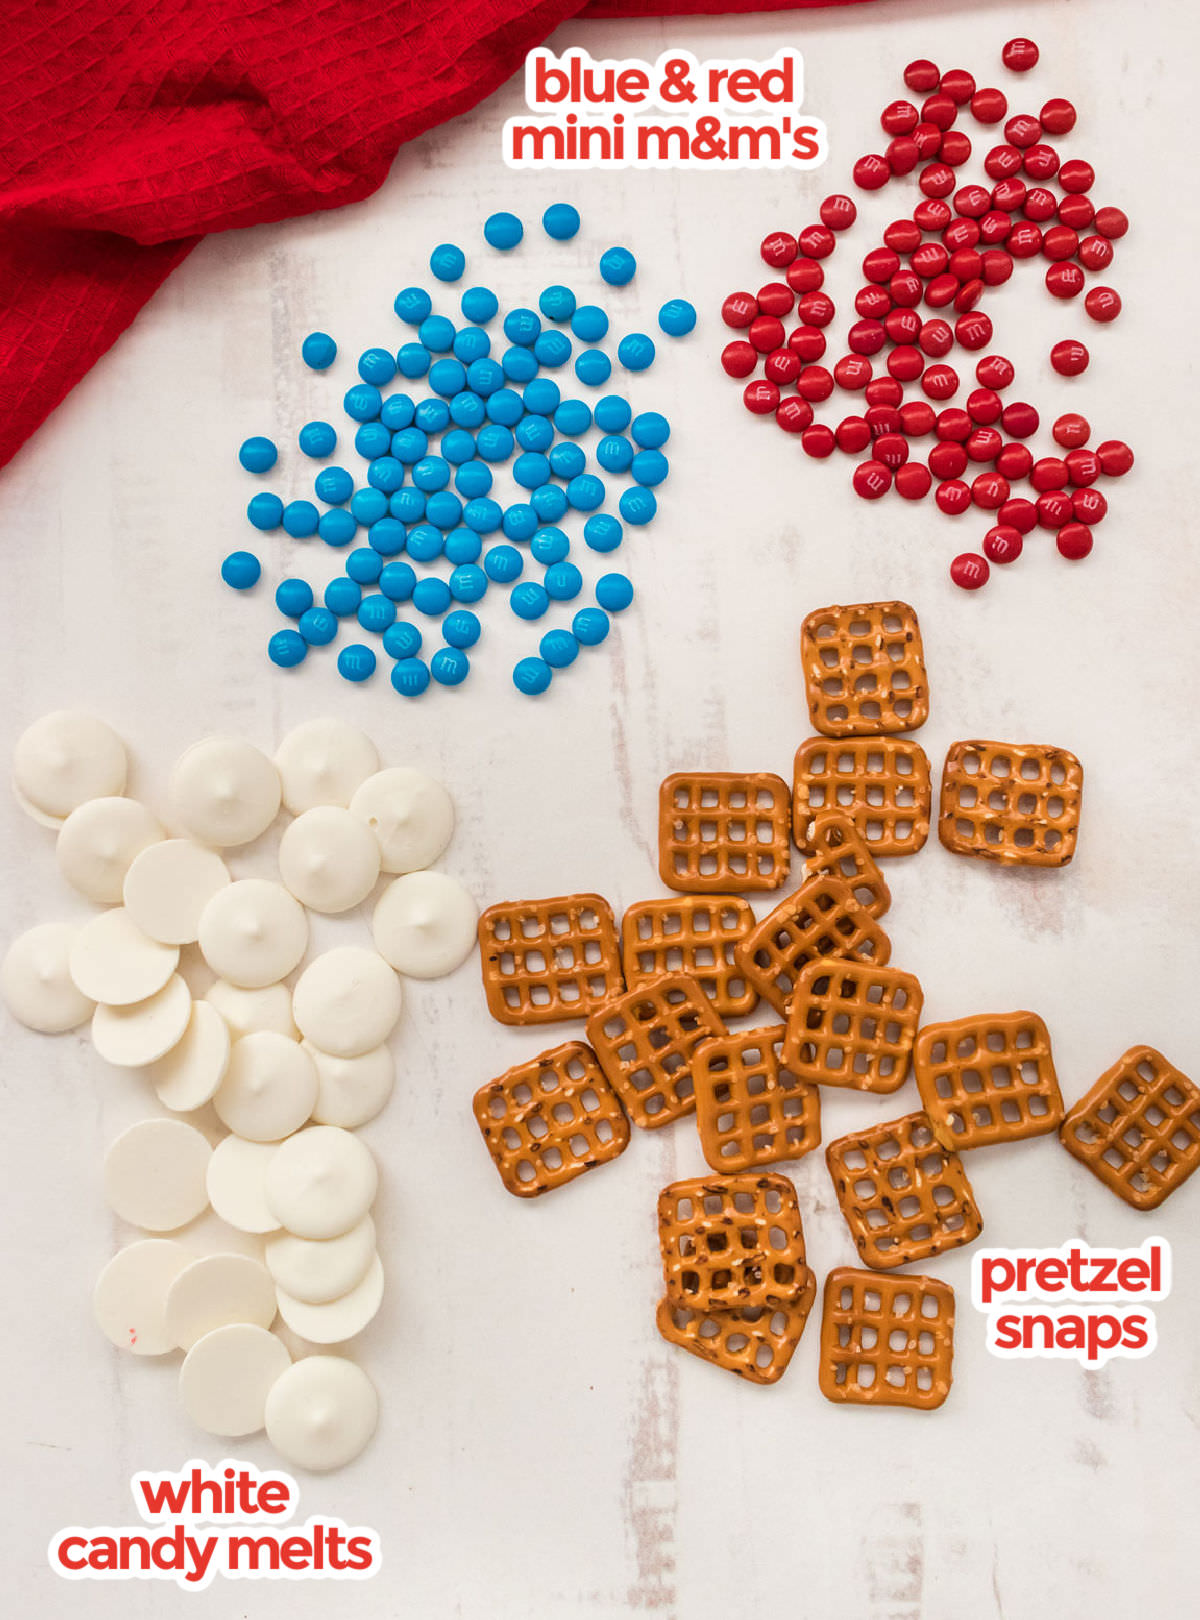 All the ingredients you will need to make Patriotic Pretzel Bites including White Candy Melts, Pretzel Snaps and Red and Blue Mini M&M's.